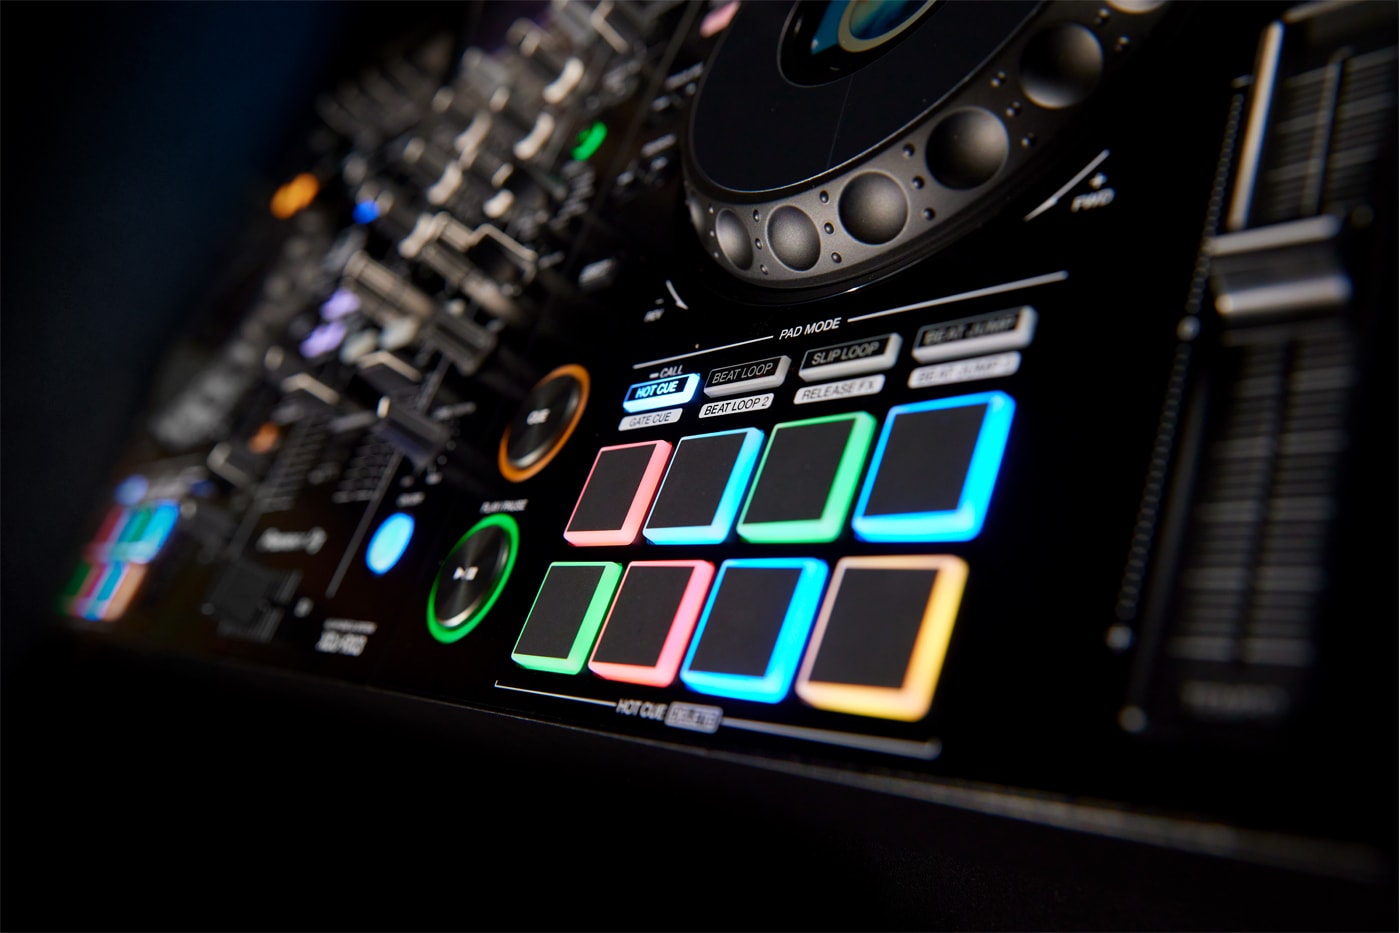 pioneer dj xdj rx3 controller deck release info color on job wheels 10.1 inch touch screen lcd touch preview 1999 usd mobiel small venue controller mixer deck serato rekordbox release info 